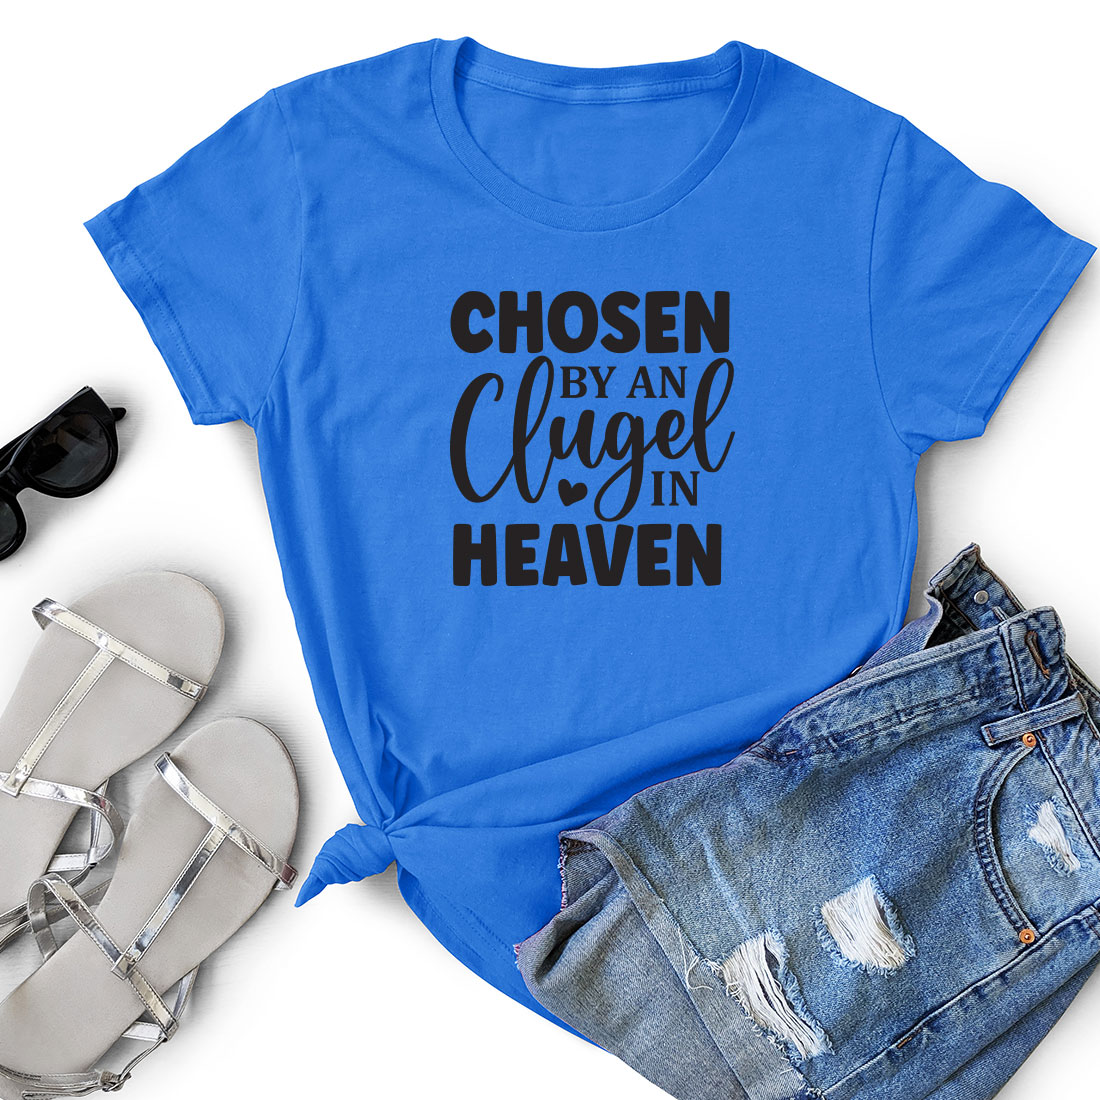 T - shirt that says chosen by an angel in heaven.